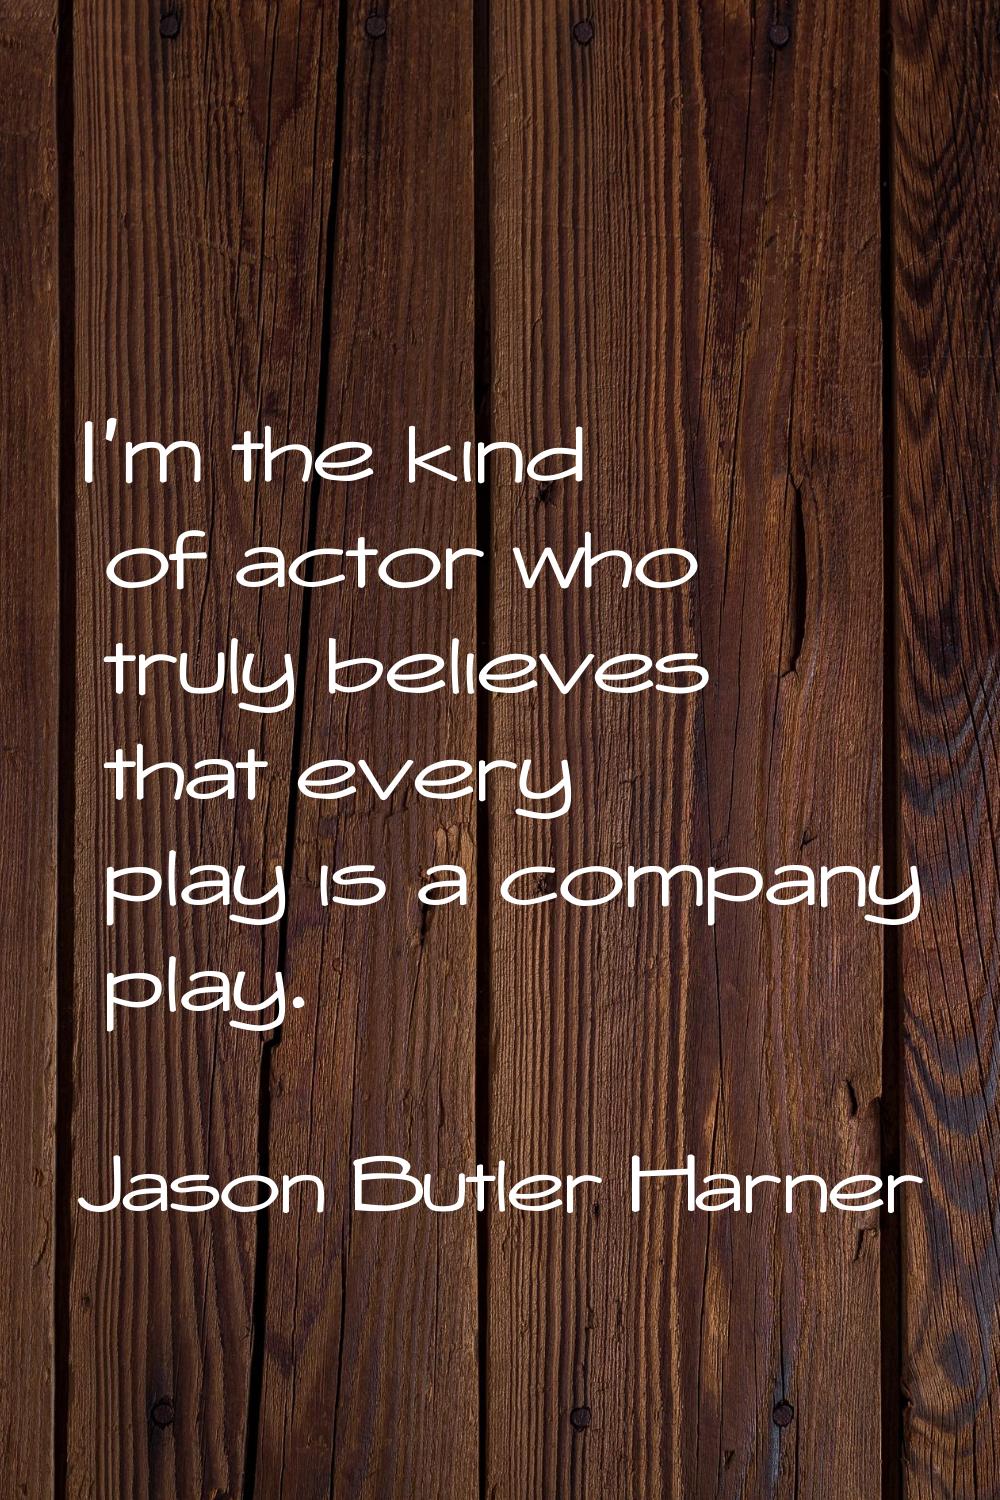 I'm the kind of actor who truly believes that every play is a company play.